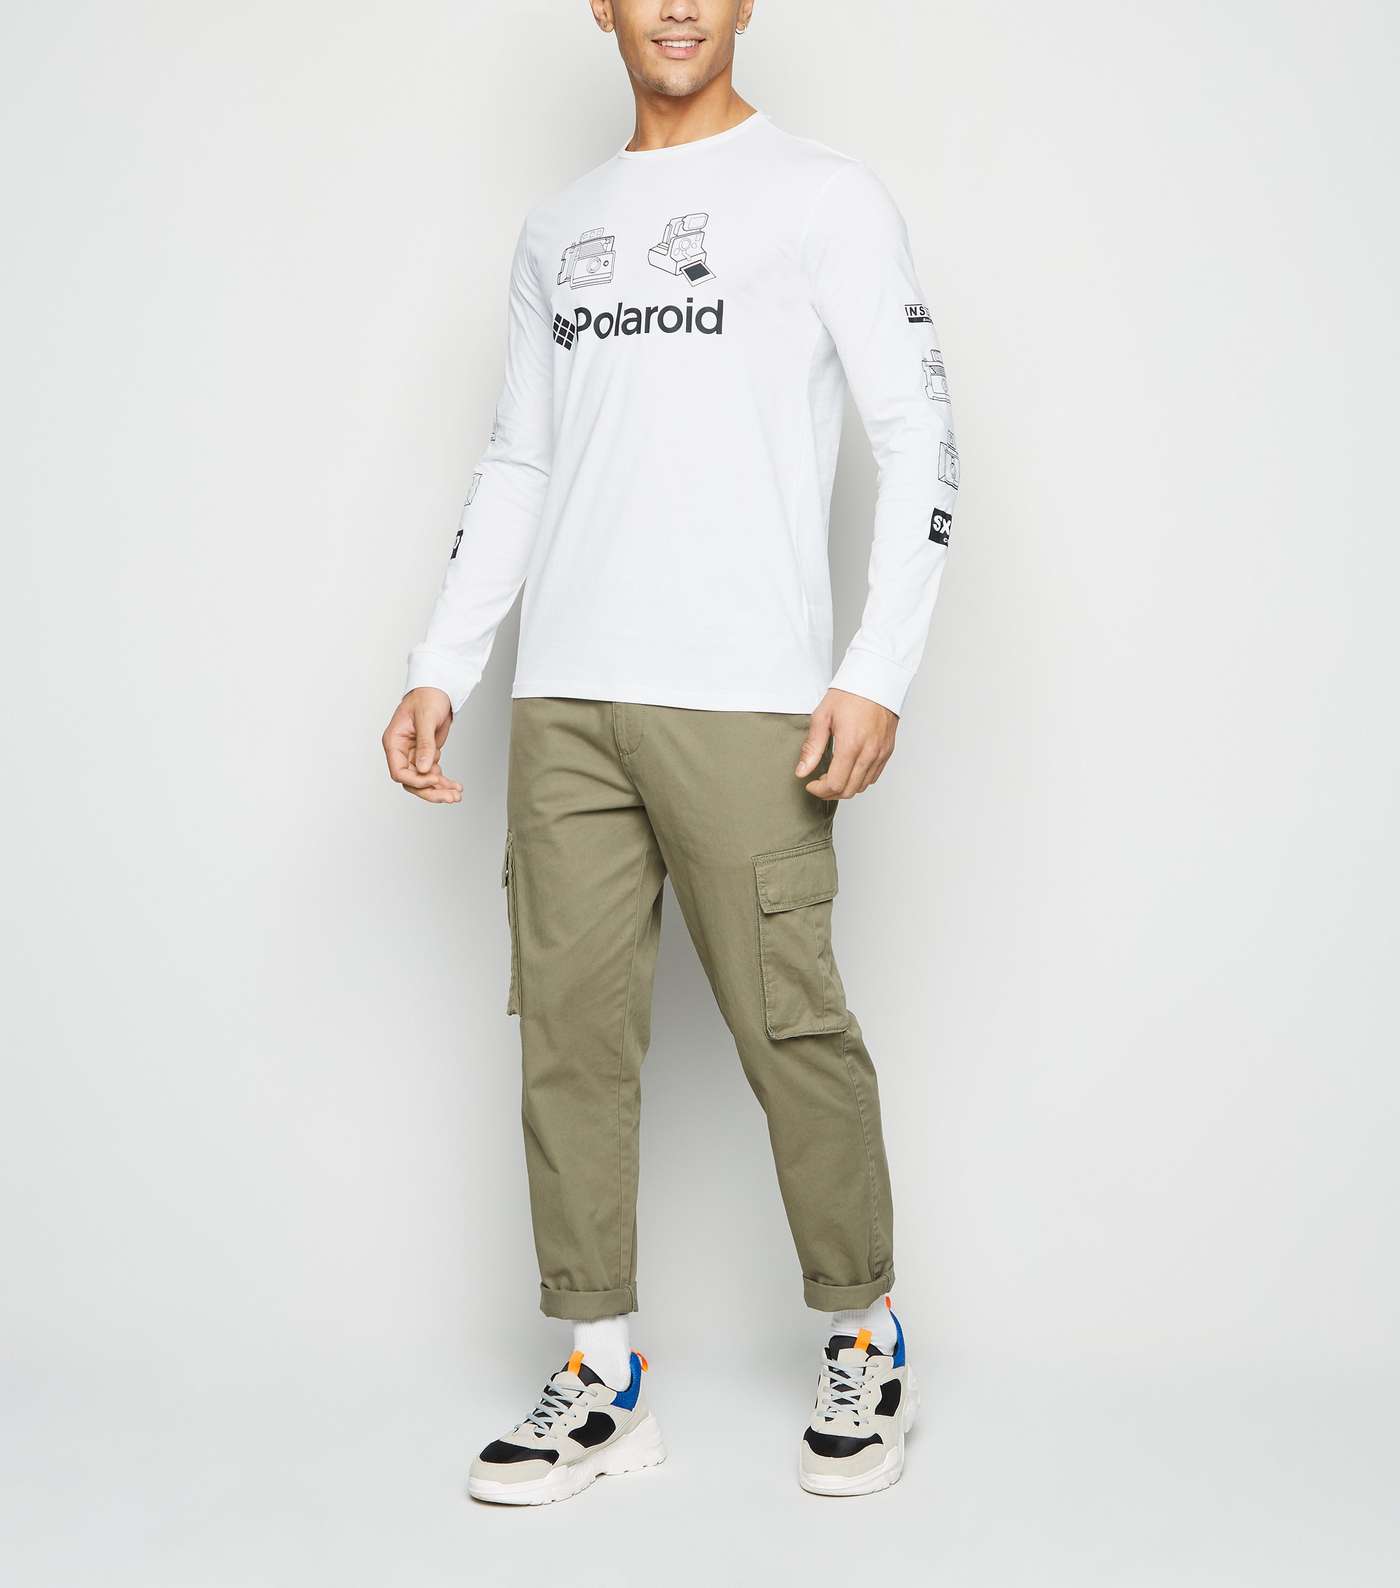 Only & Sons White Polaroid Logo Long Sleeve Top  Image 2